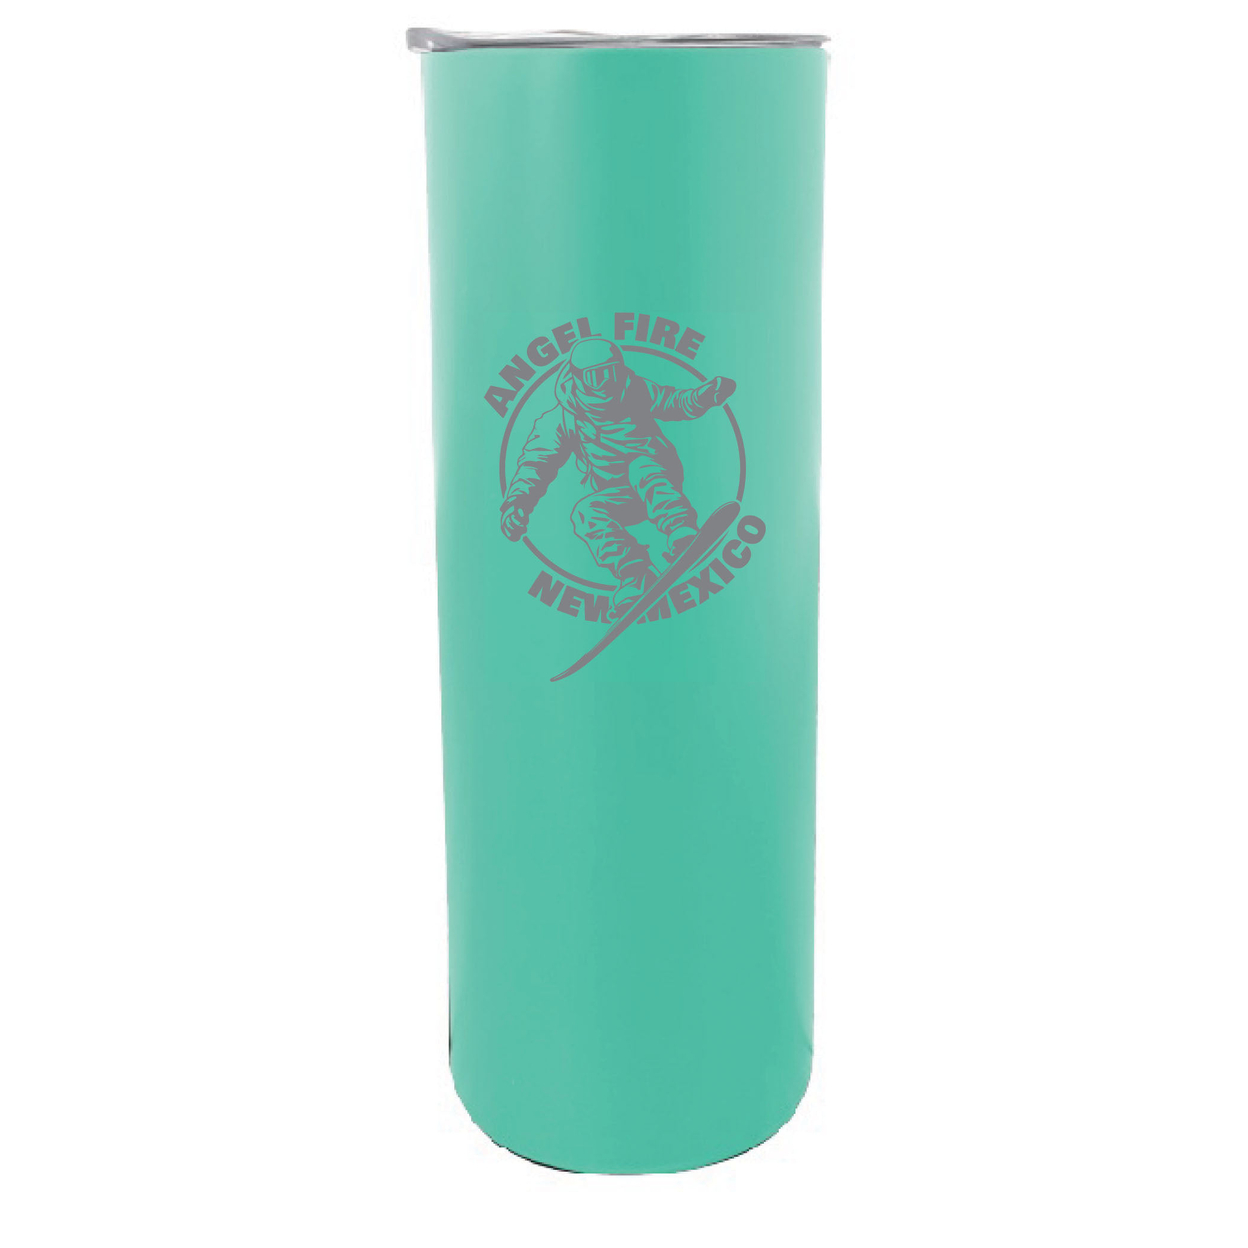 Angel Fire New Mexico Souvenir 20 Oz Engraved Insulated Stainless Steel Skinny Tumbler - Gray Glitter,,Single Unit